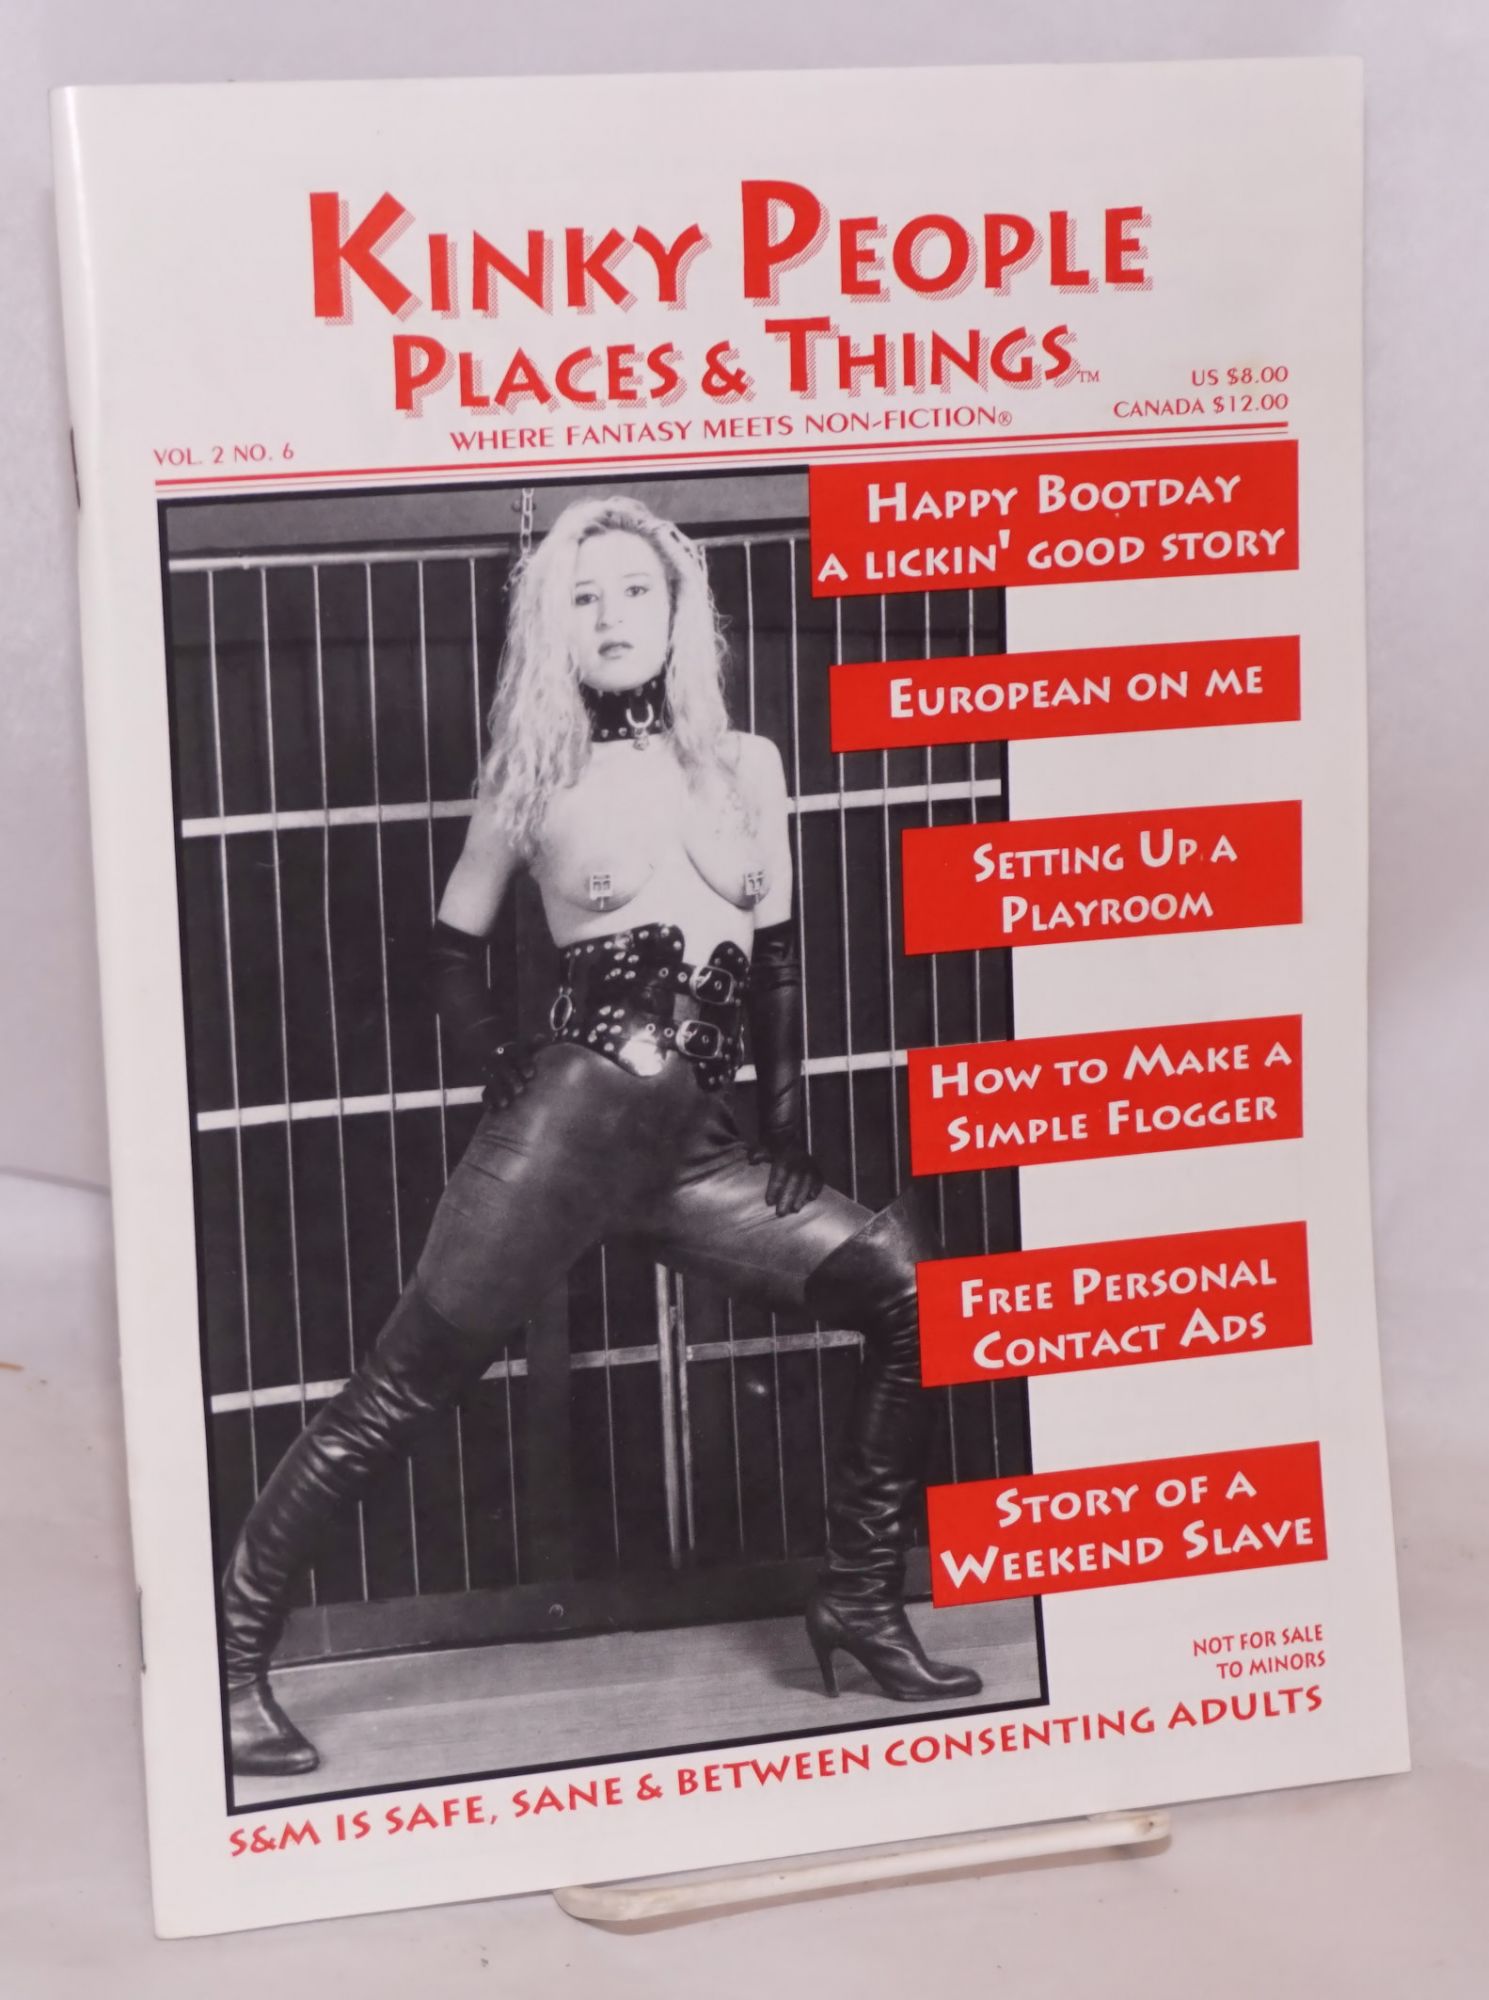 Kinky People Places and Things where fantasy meets non-fiction,